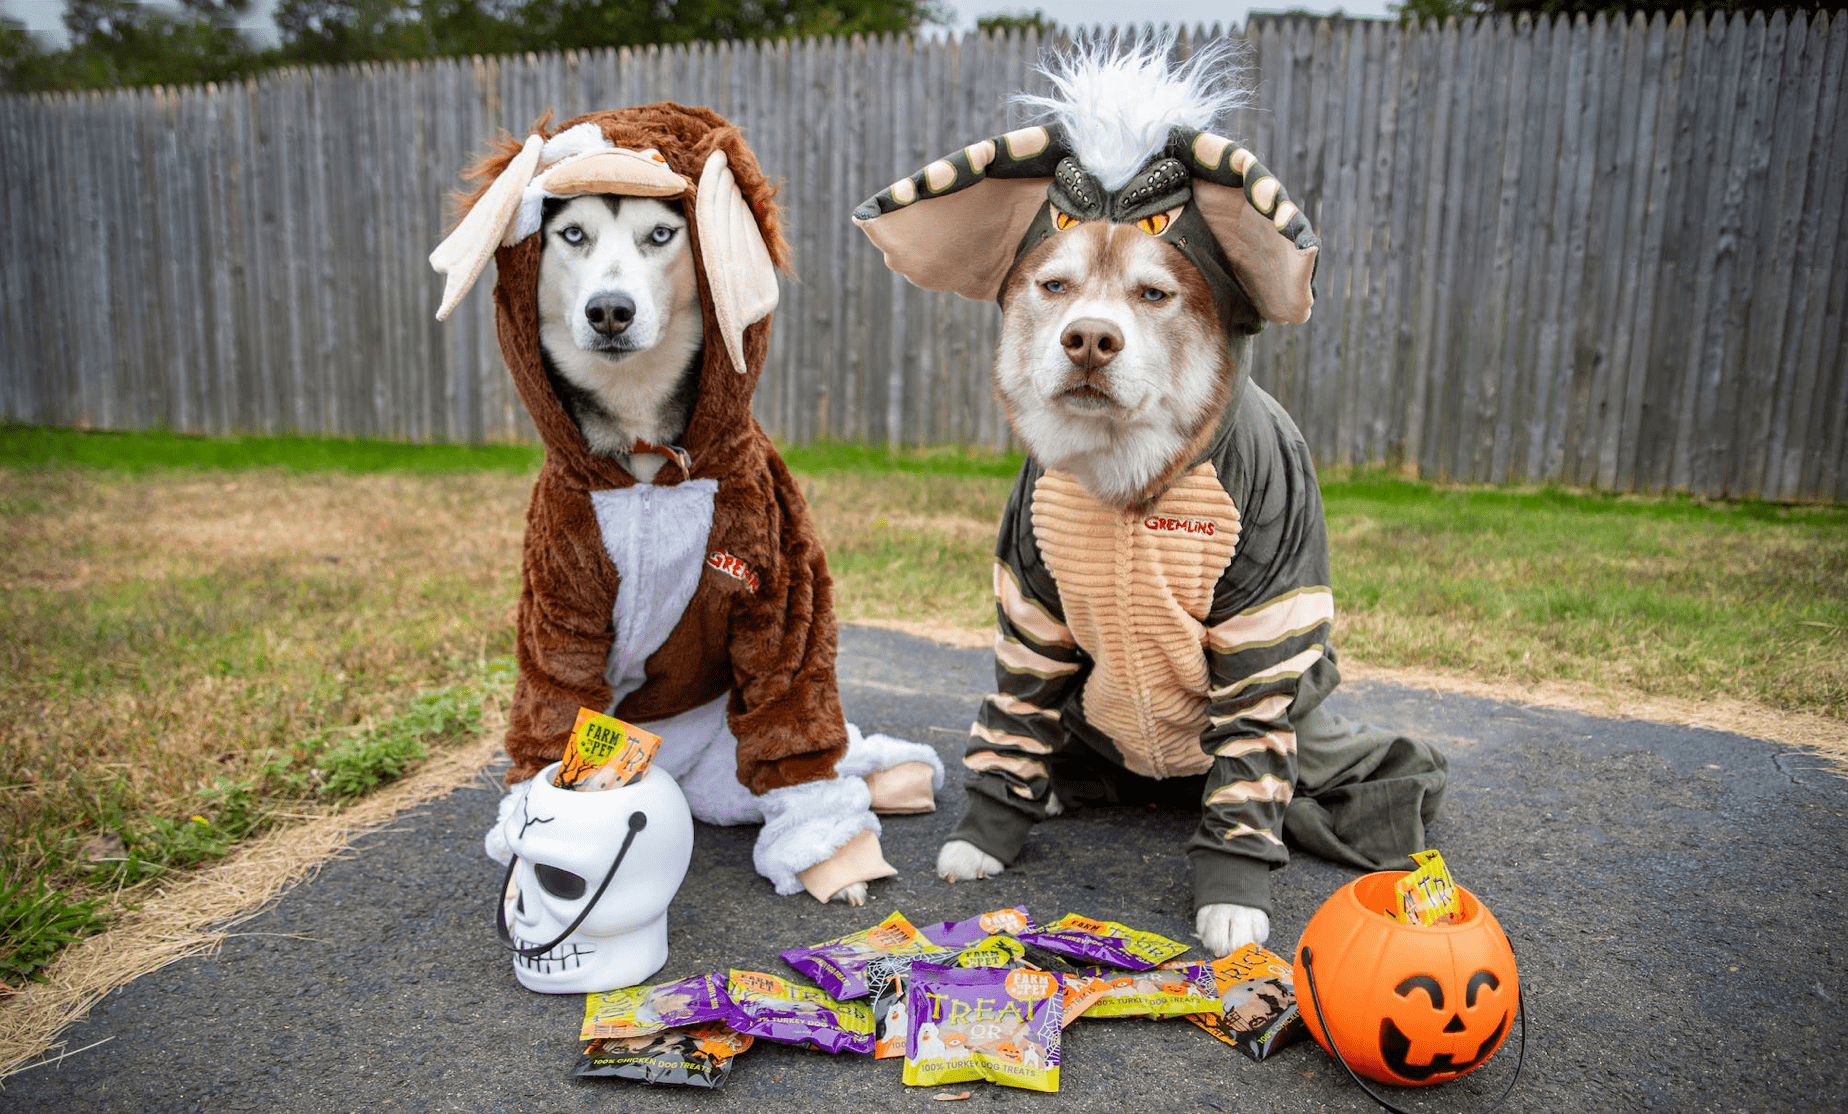 Spooktacular Costume Ideas for You and Your Pooch - Farm To Pet